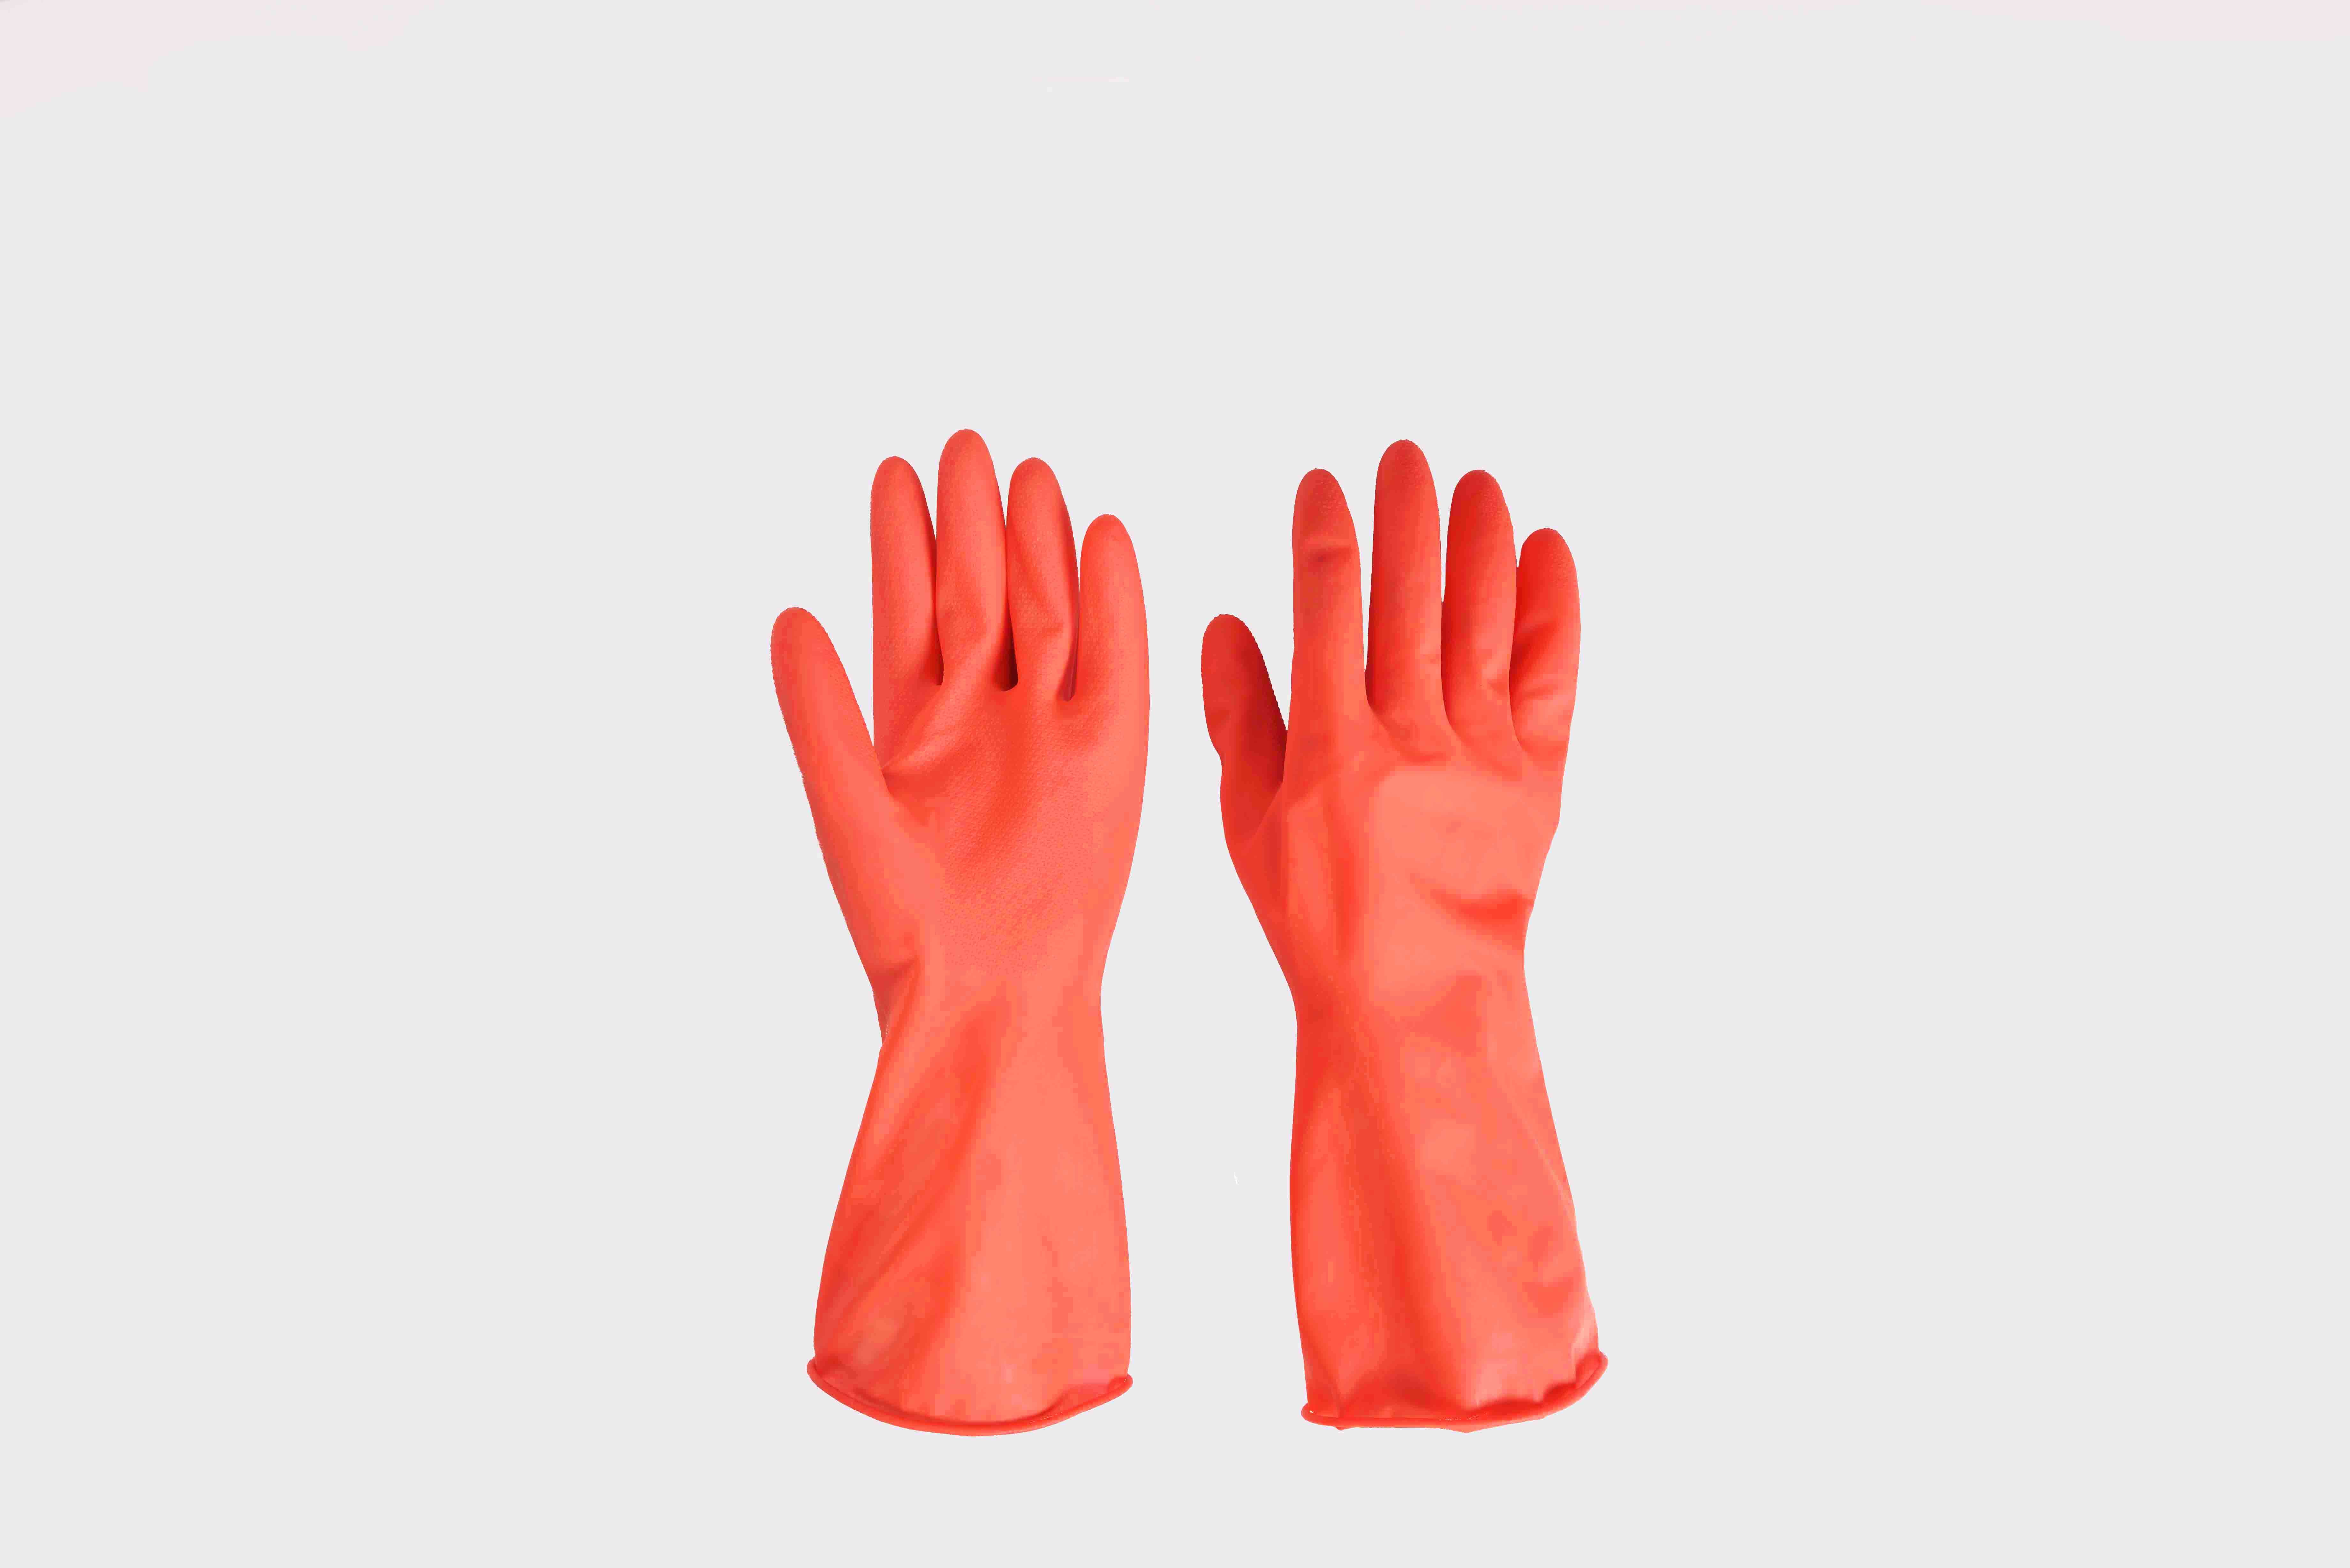 Wholesale price for Rubber glove-household in Nigeria